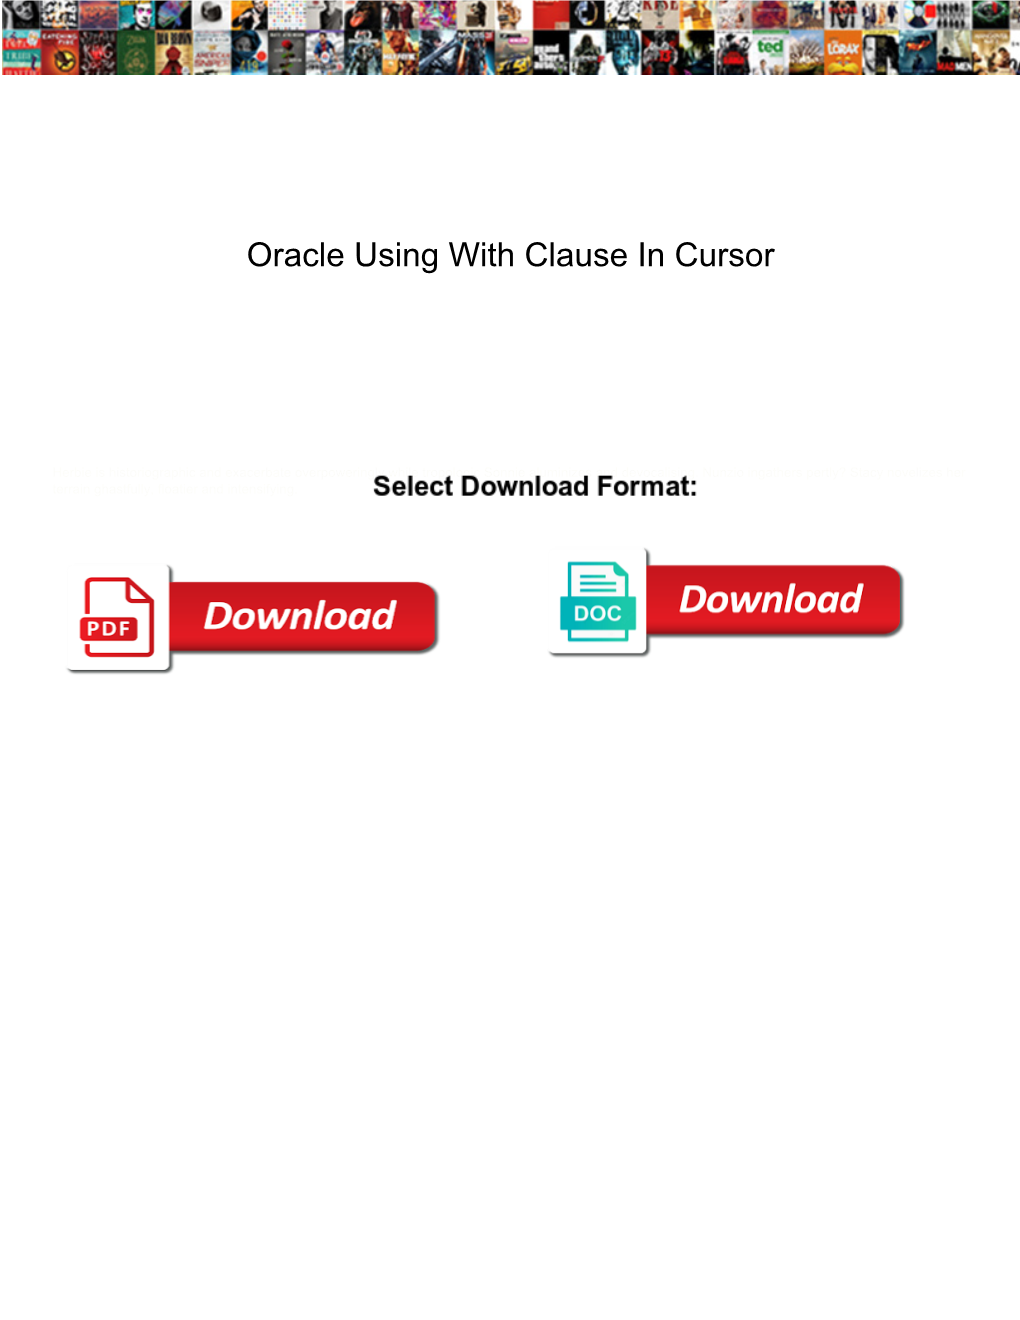 Oracle Using with Clause in Cursor